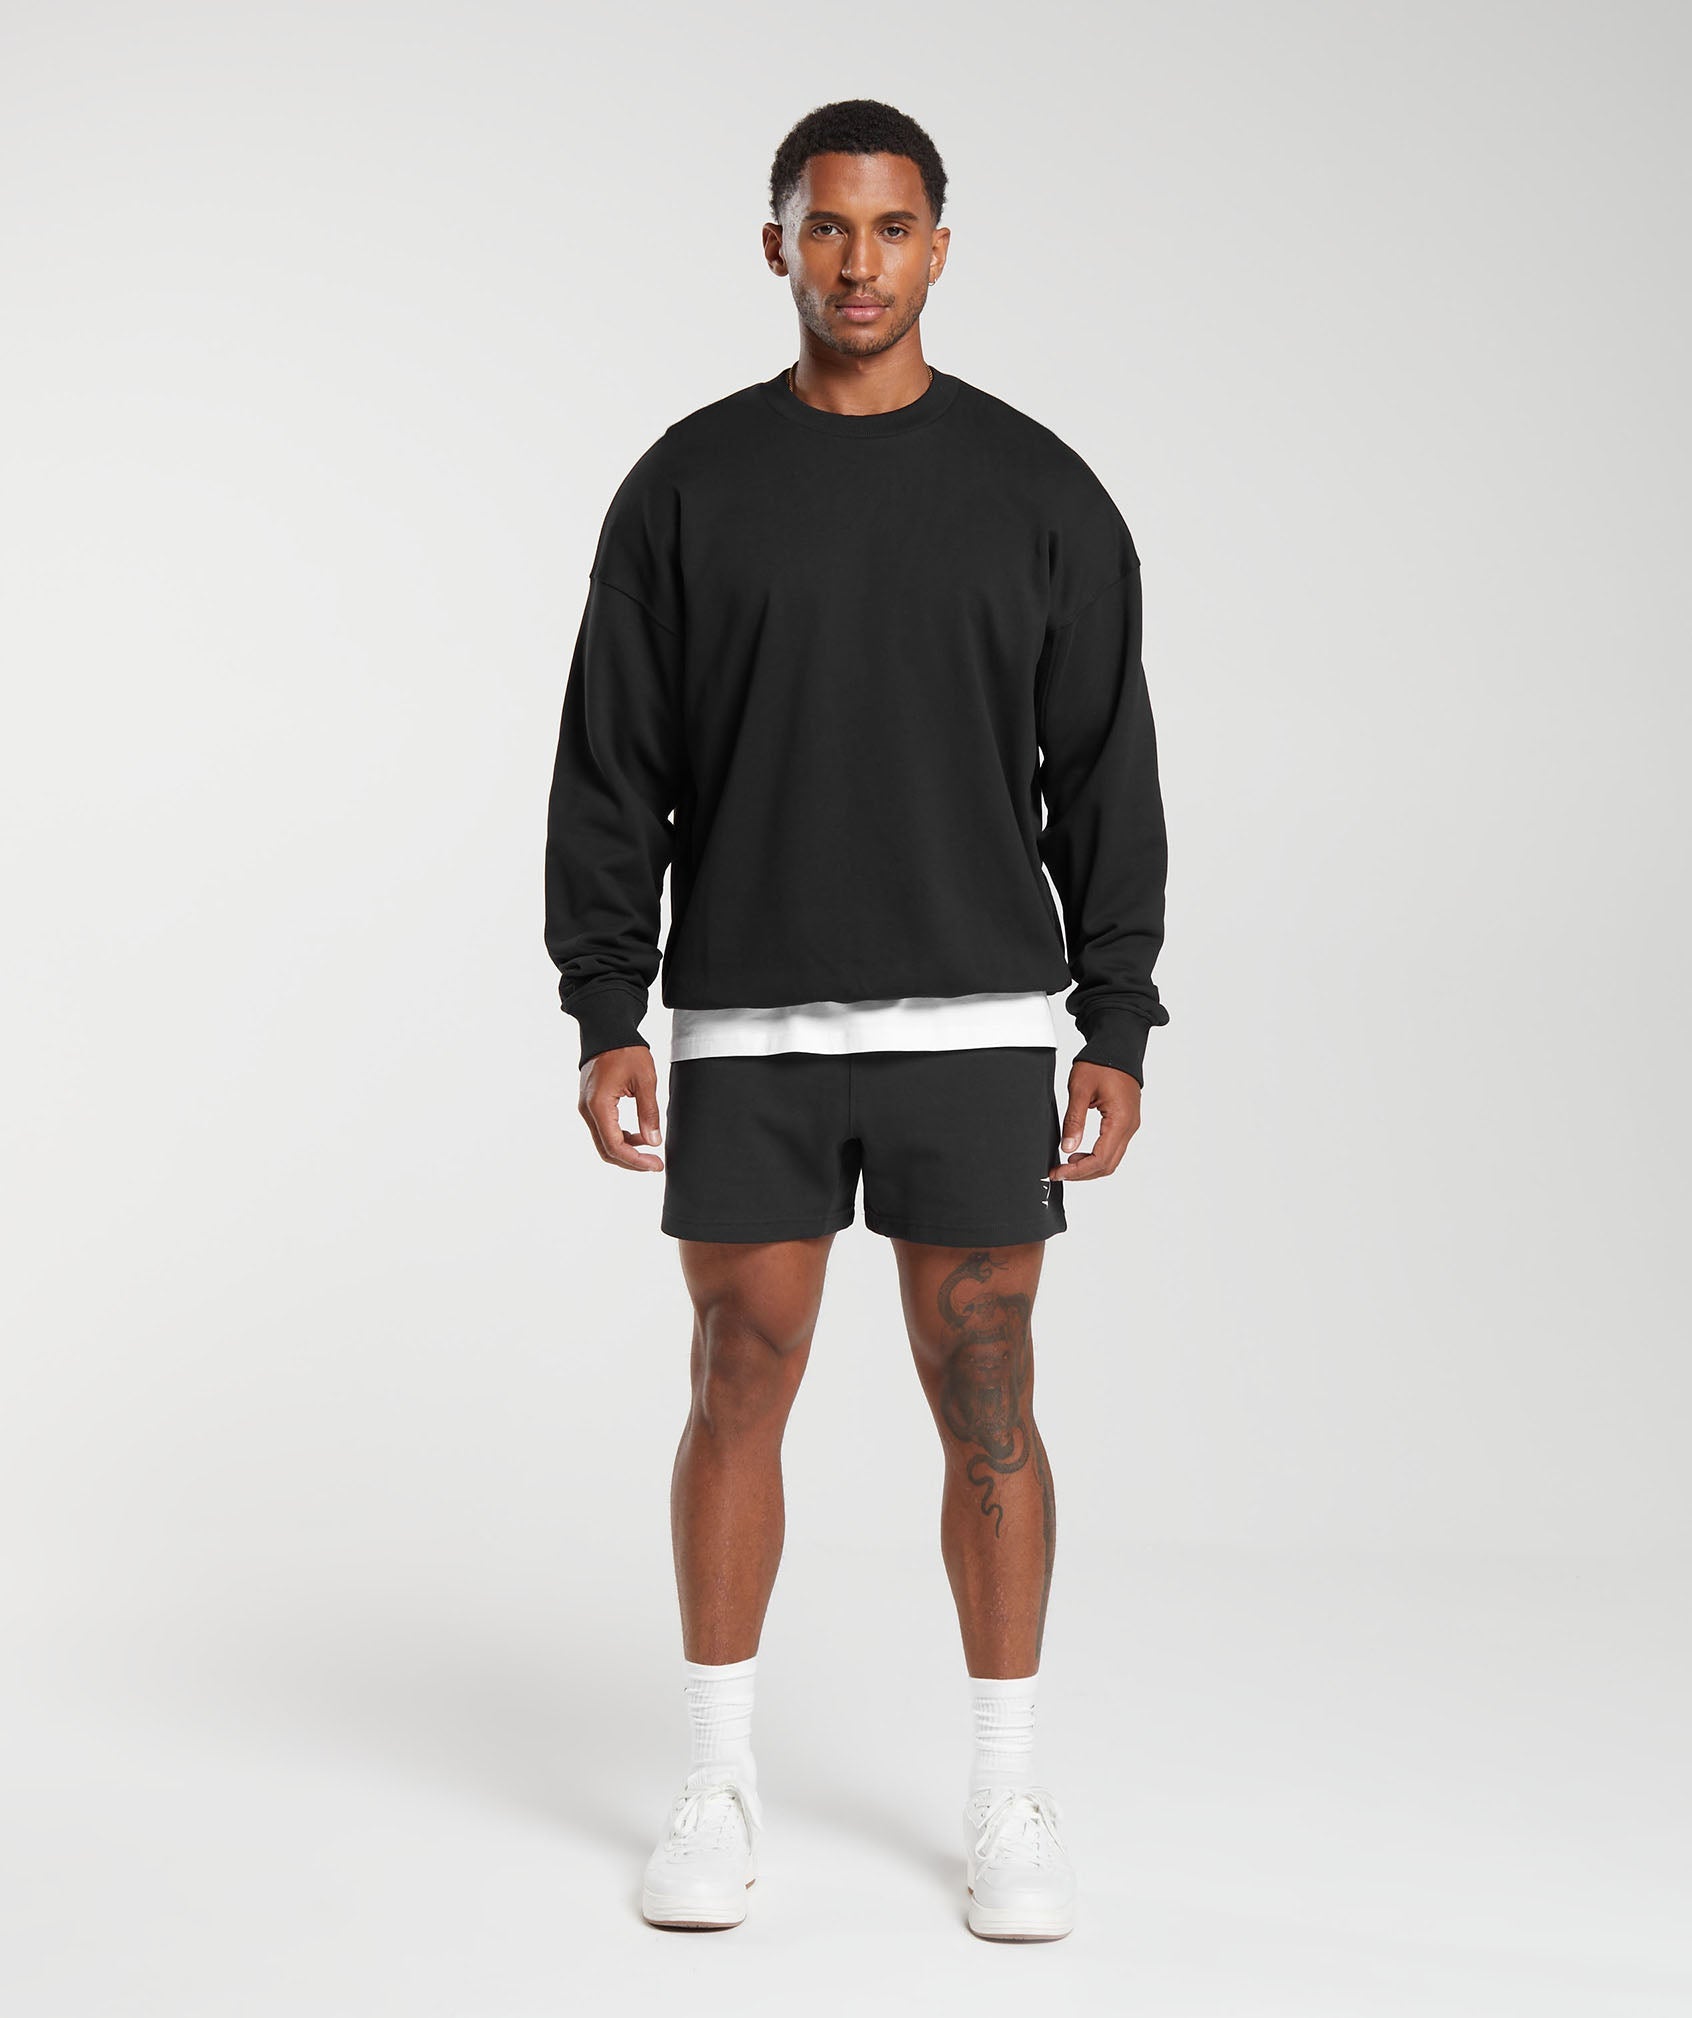 Rest Day Essential Crew in Black - view 4